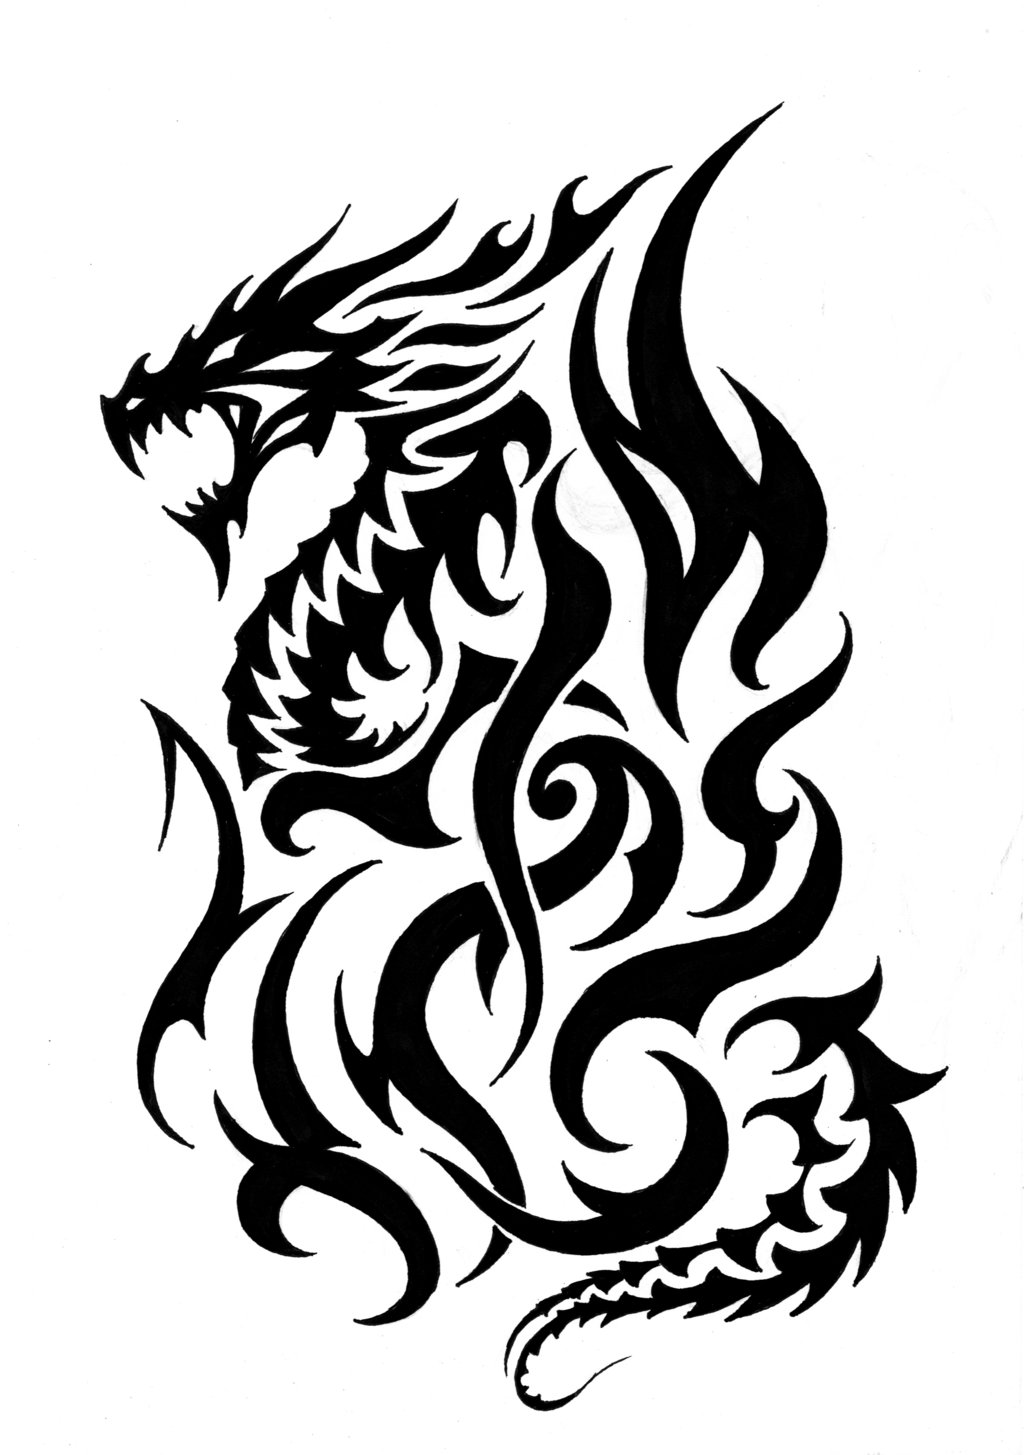 Tribal Fire Dragon Tattoos Designs - Clipart library